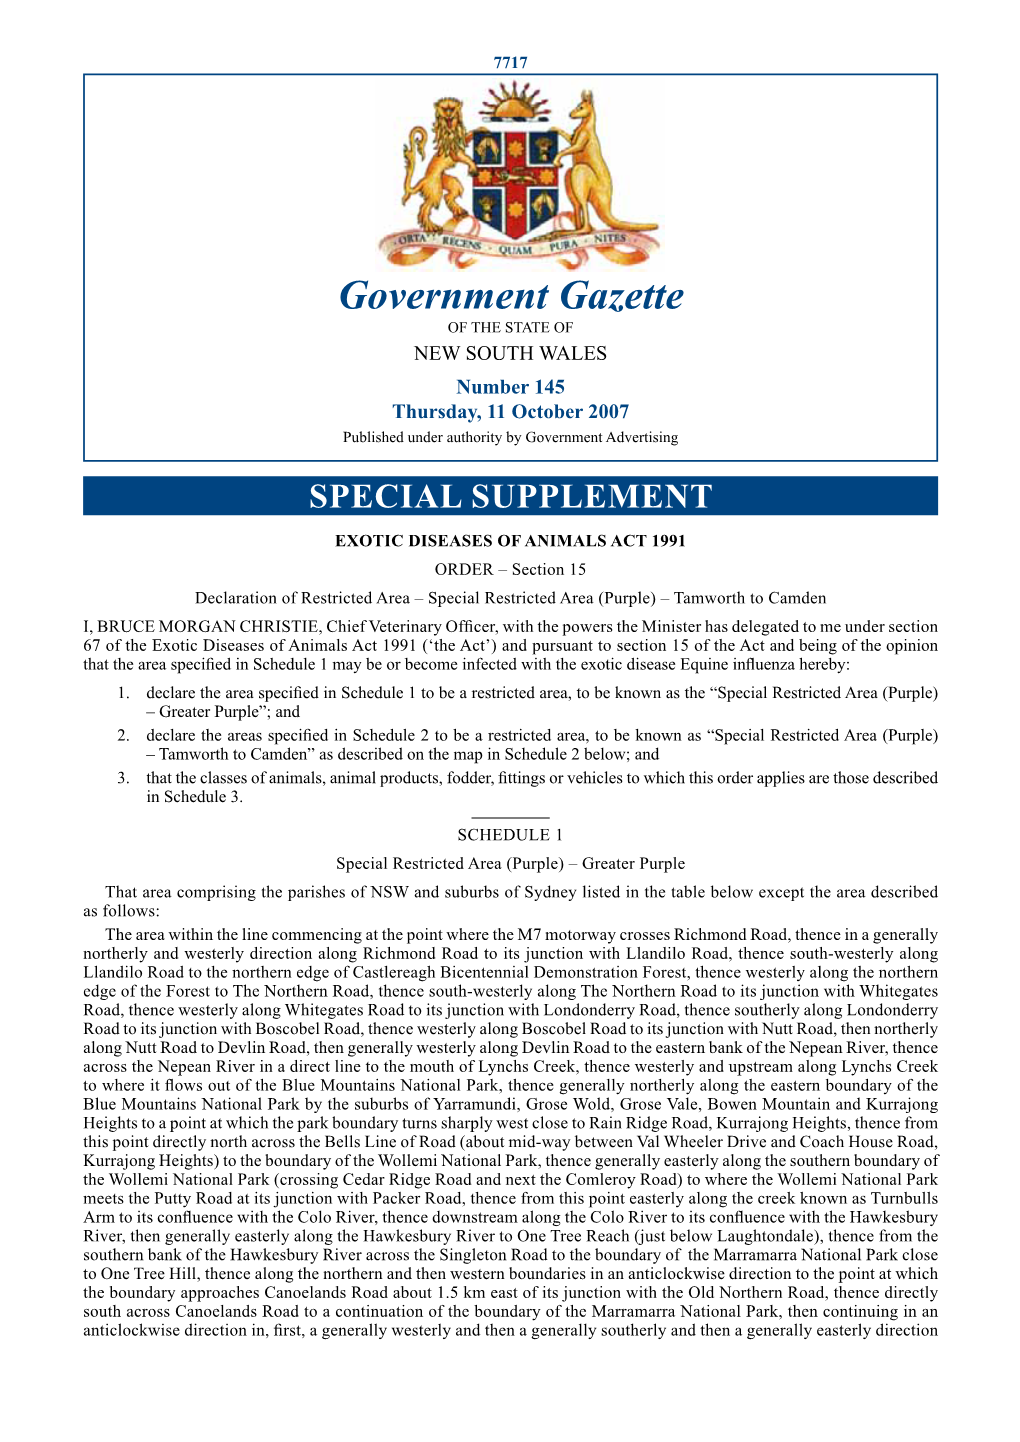 Government Gazette of the STATE of NEW SOUTH WALES Number 145 Thursday, 11 October 2007 Published Under Authority by Government Advertising